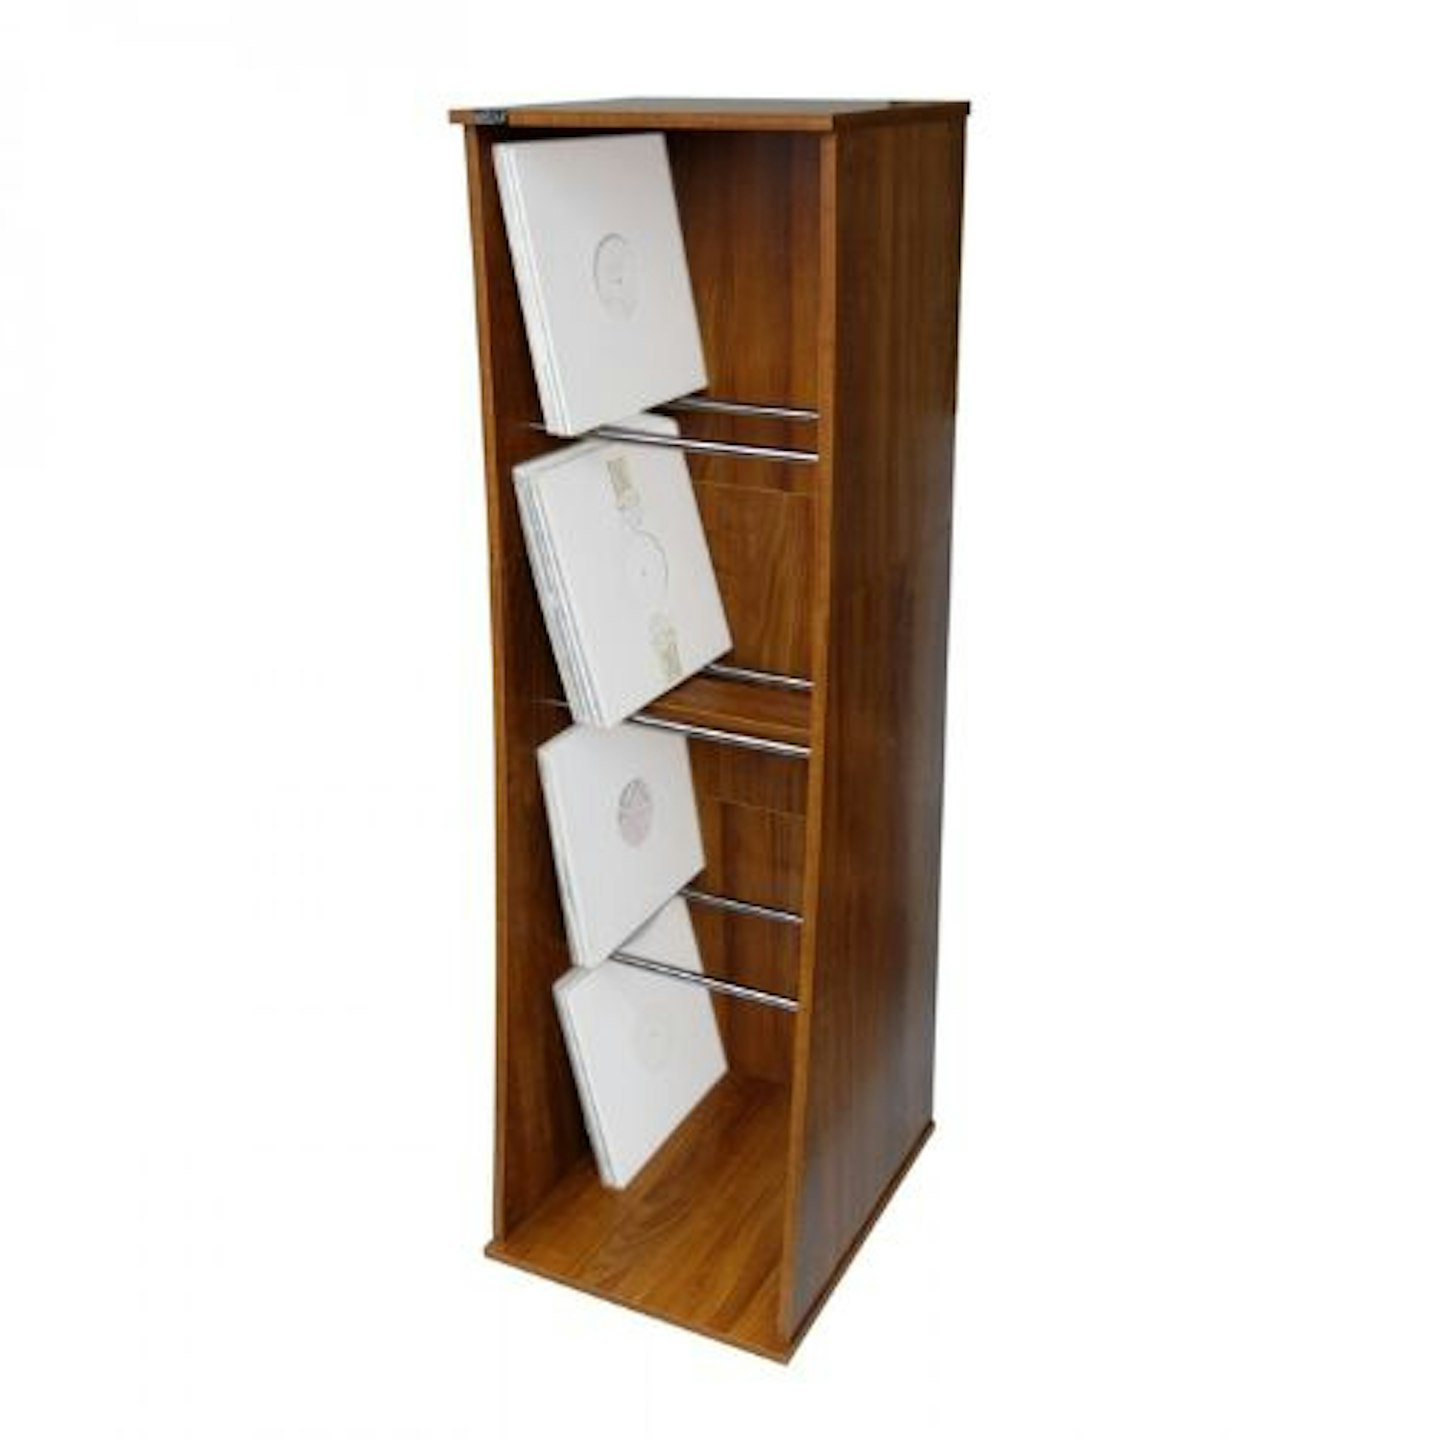 Sefour Vinyl Storage Tower, Mid-Century Synth Rosewood